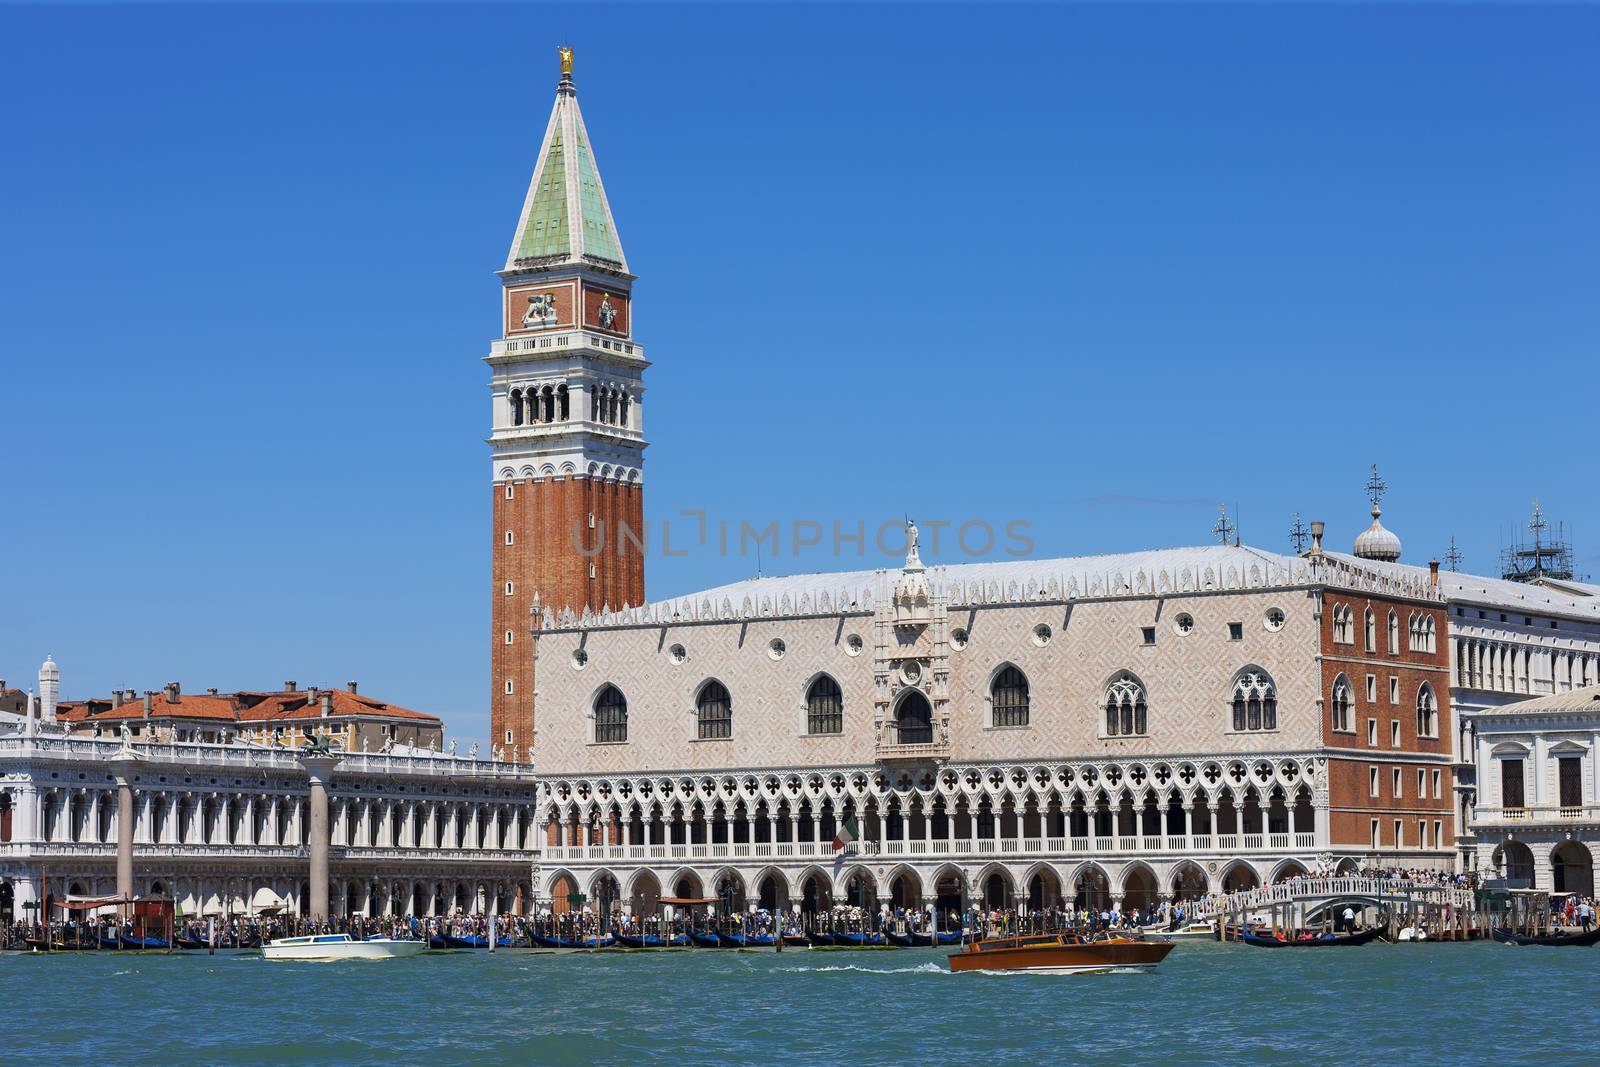 Doge's palace and Campanile on Piazza di San Marco, Venice, Italy